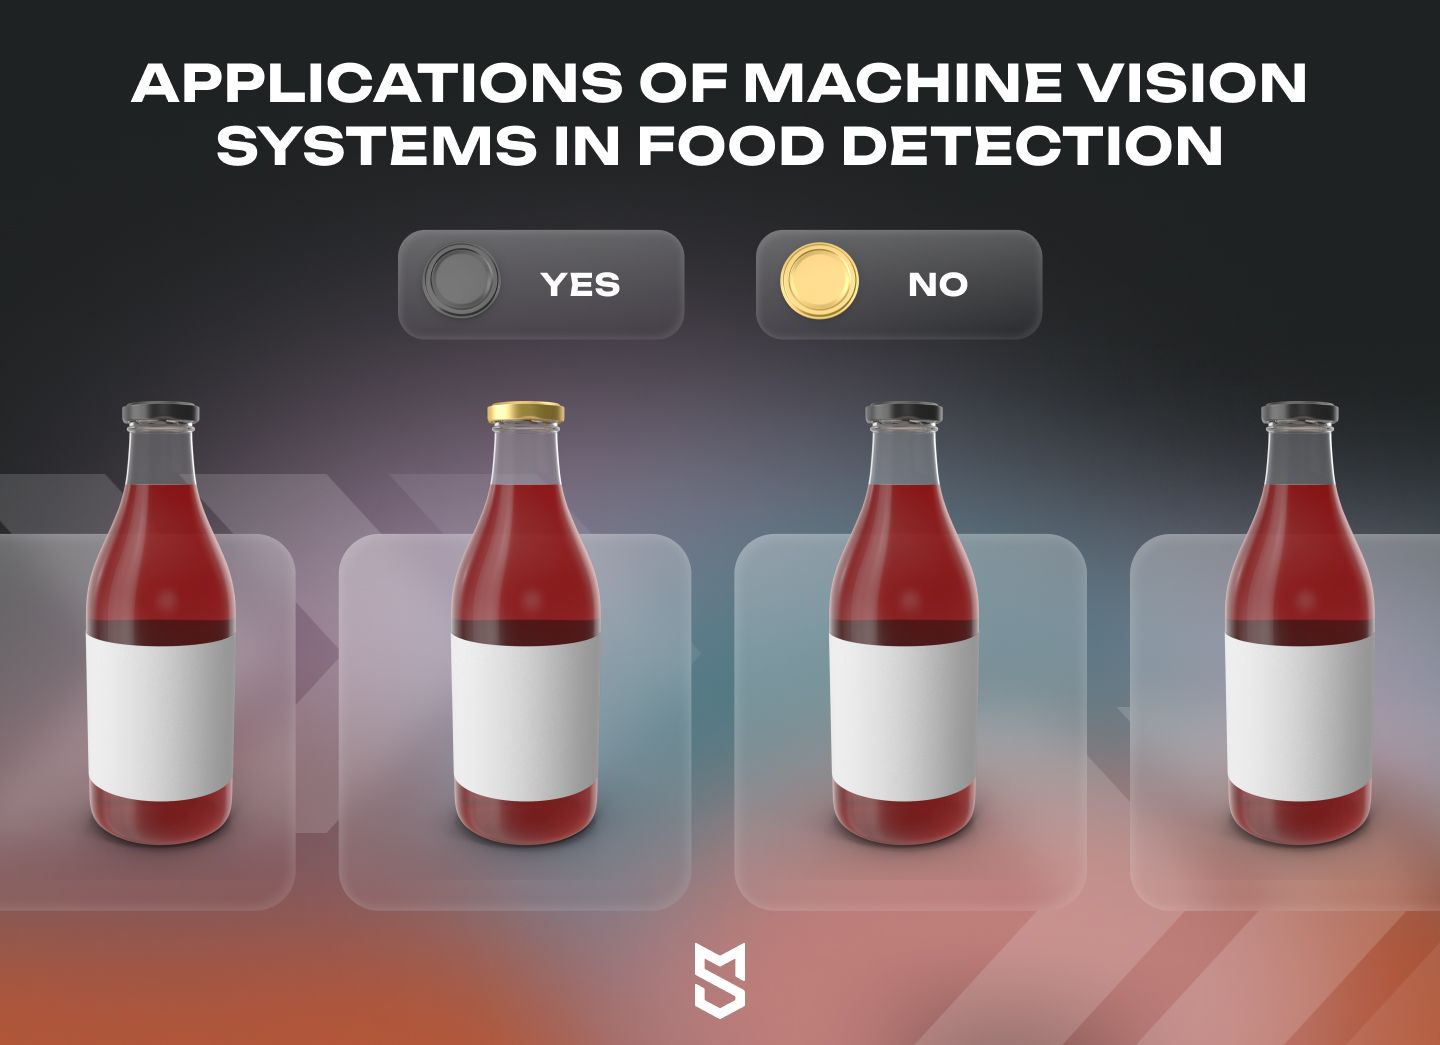 Applications of machine vision systems in food detection